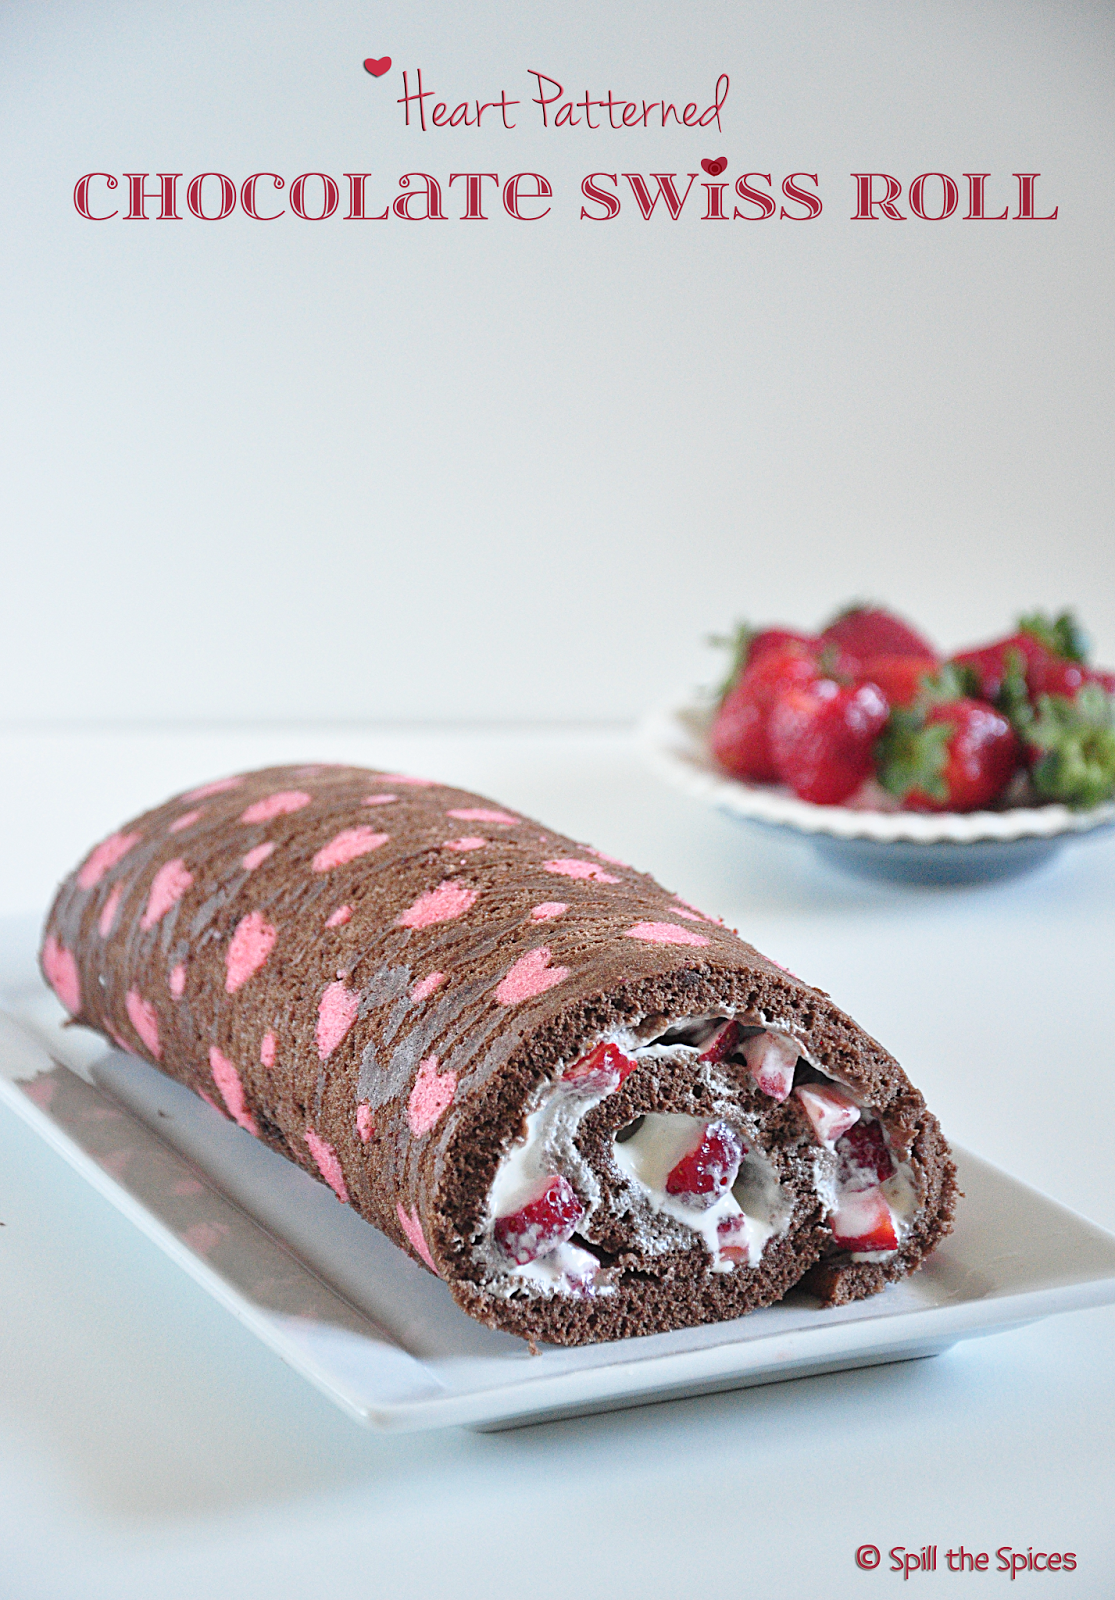 Patterned Chocolate Swiss Roll | Spill the Spices